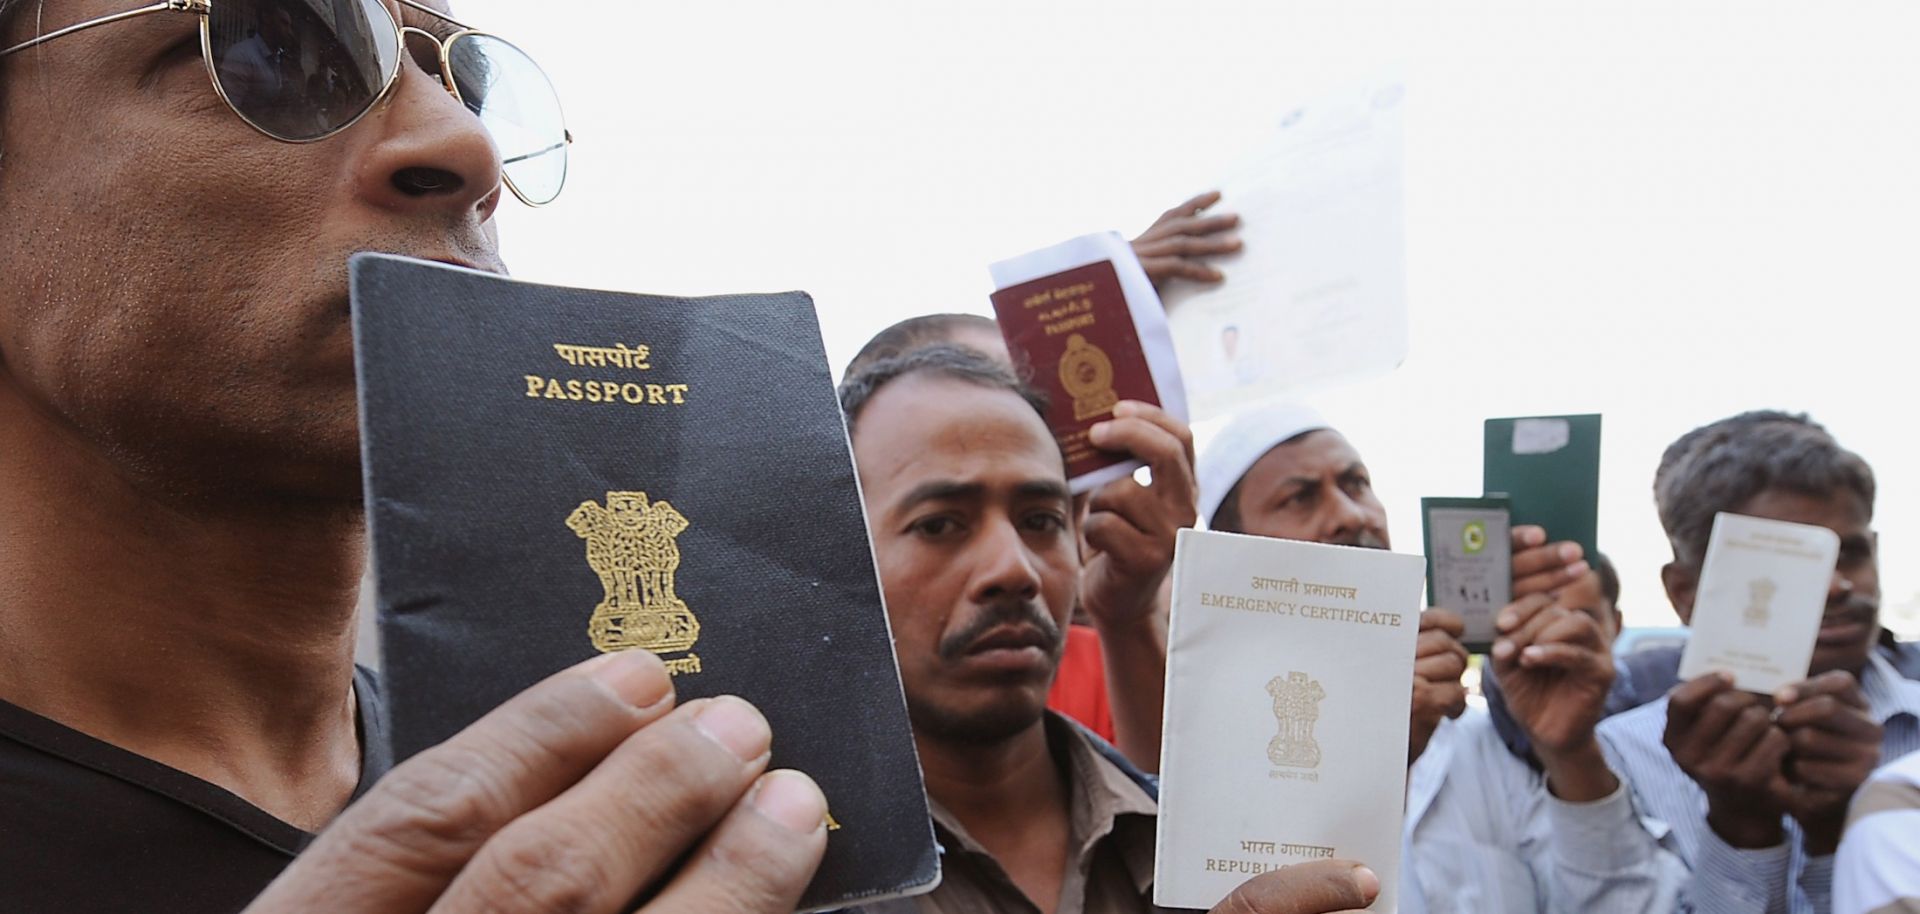 Foreign workers show their passports as they gather outside a Saudi immigration office in Riyadh, Saudi Arabia, on Nov. 4, 2013. 